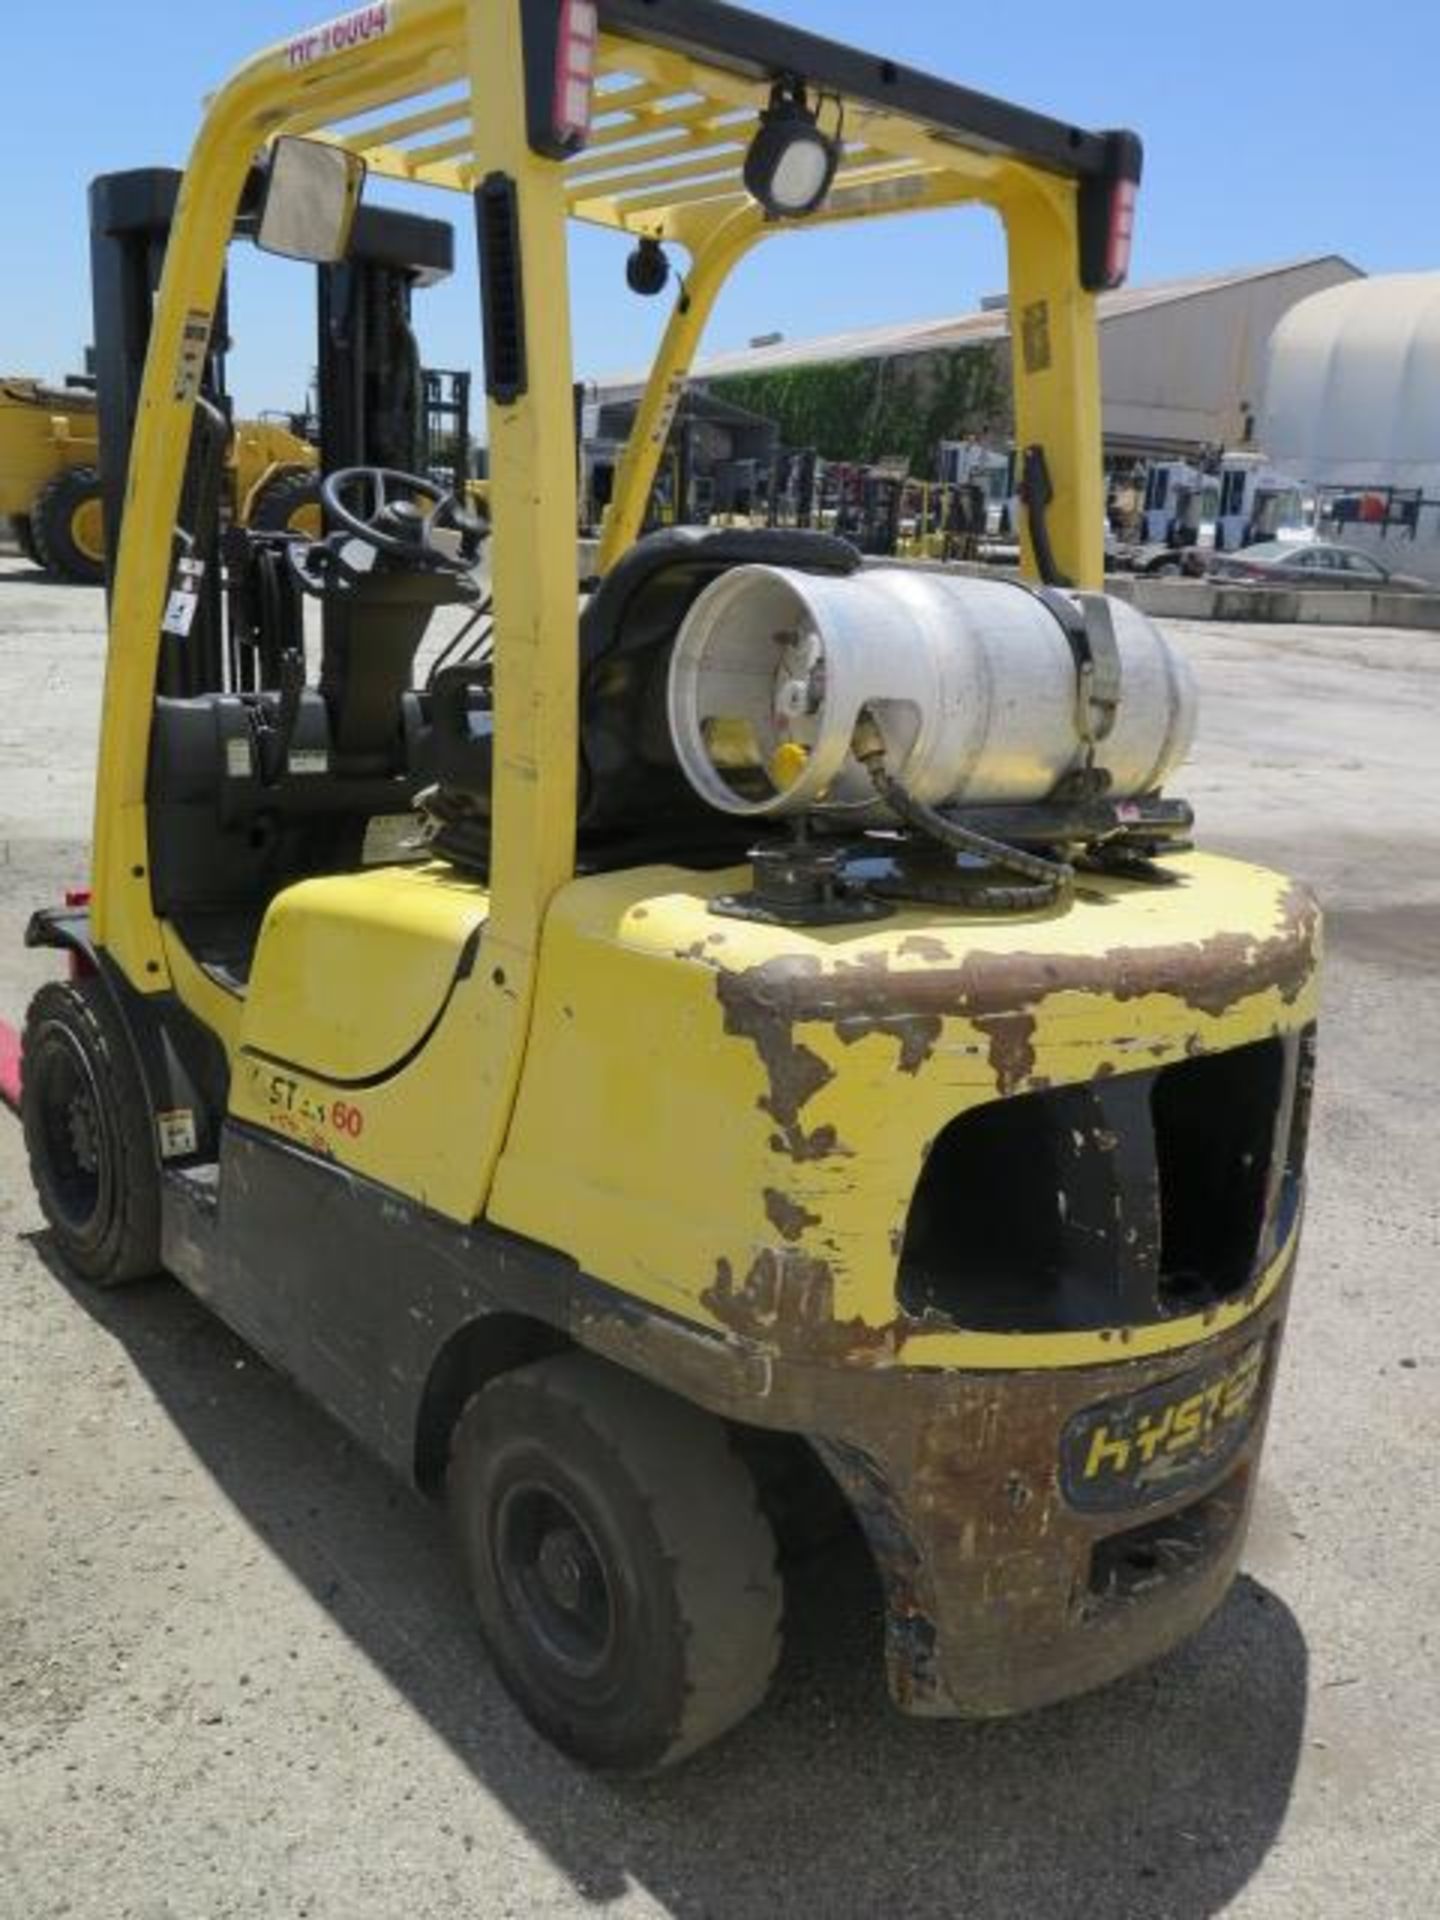 2018 Hyster H60FT 6000 Lb Cap LPG Forklift s/n P177V04957P w/ 3-Stage,182” Lift Height, SOLD AS IS - Image 10 of 21